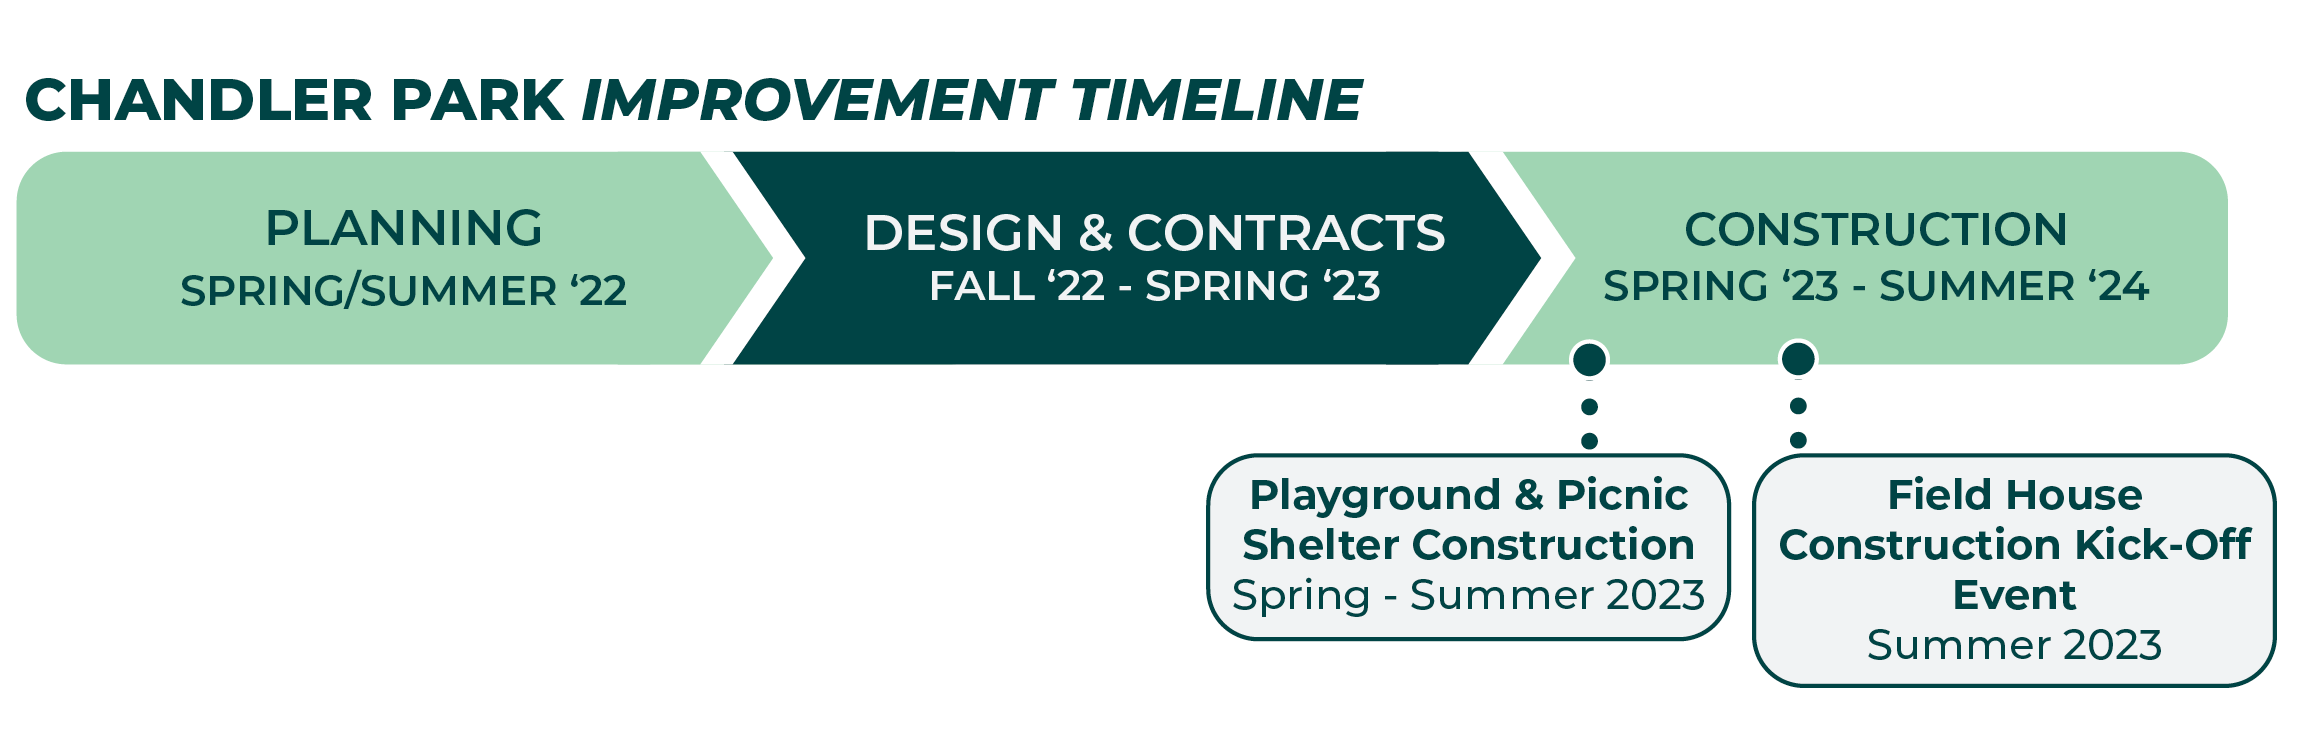 Playground &amp; picnic shelter construction this spring, with the Chandler Field House construction starting summer of 2023 going to 2024